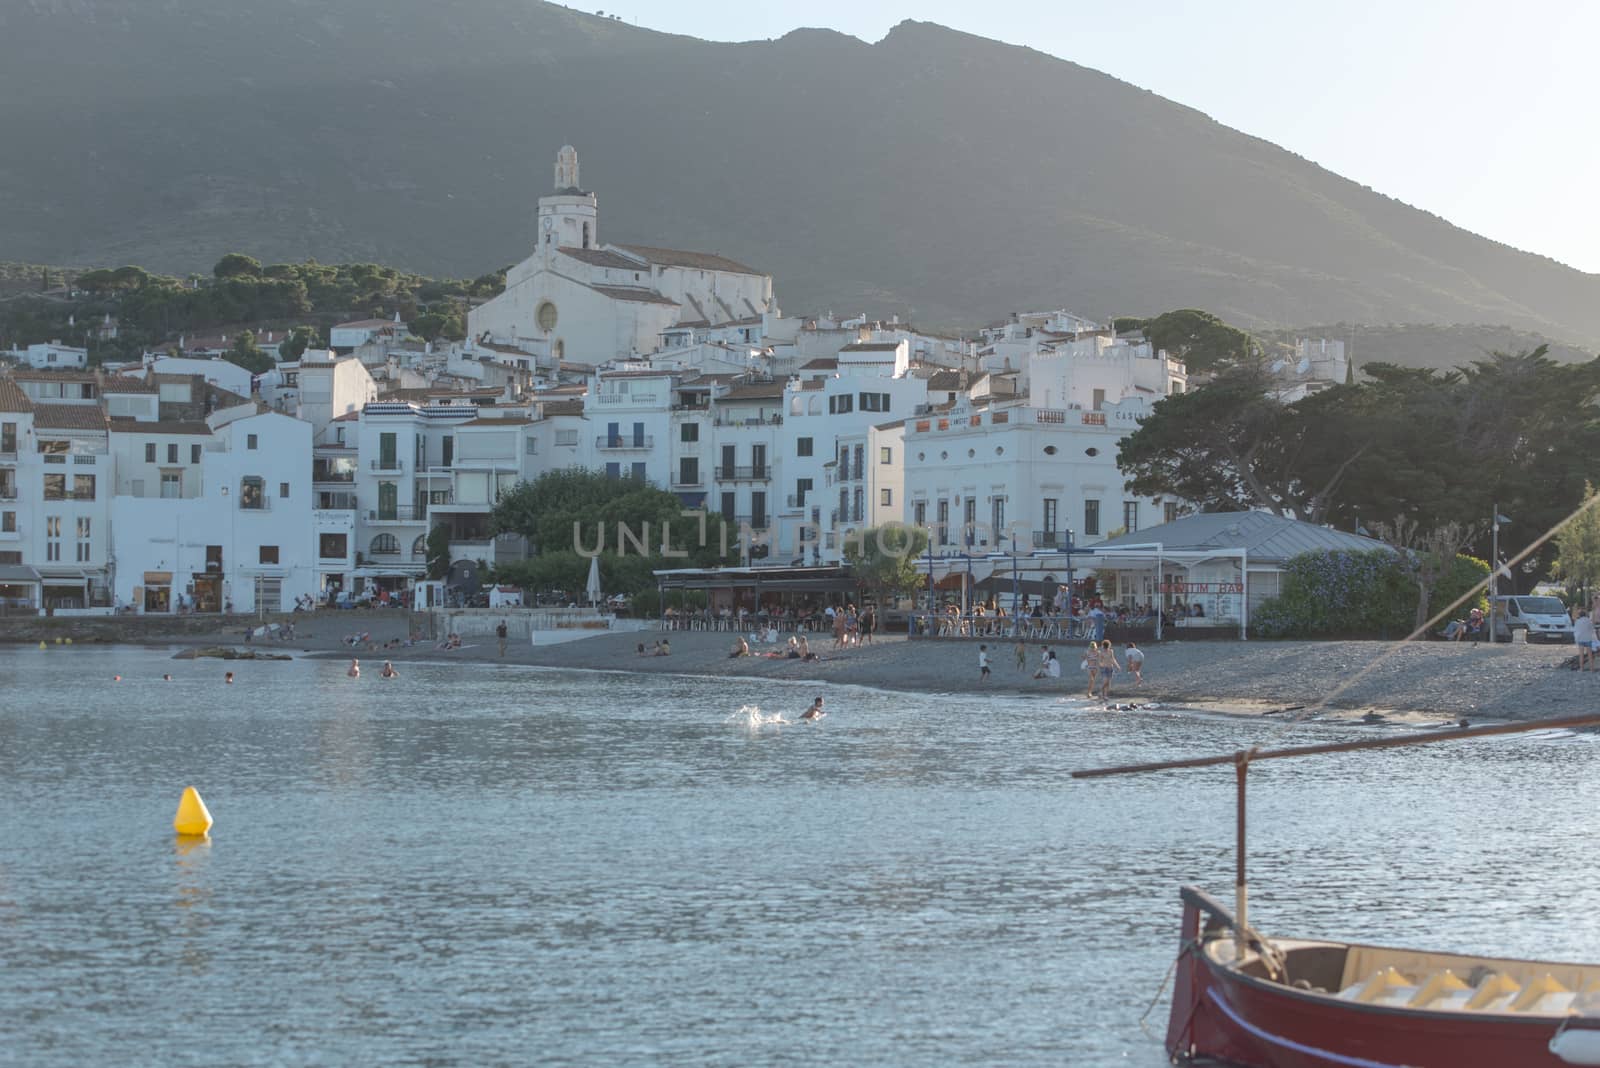 Cadaques, Spain : 07 JULY 2020 : Boats in the beach and houses of the village of Cadaques, Spain in summer on 07 july 2020.